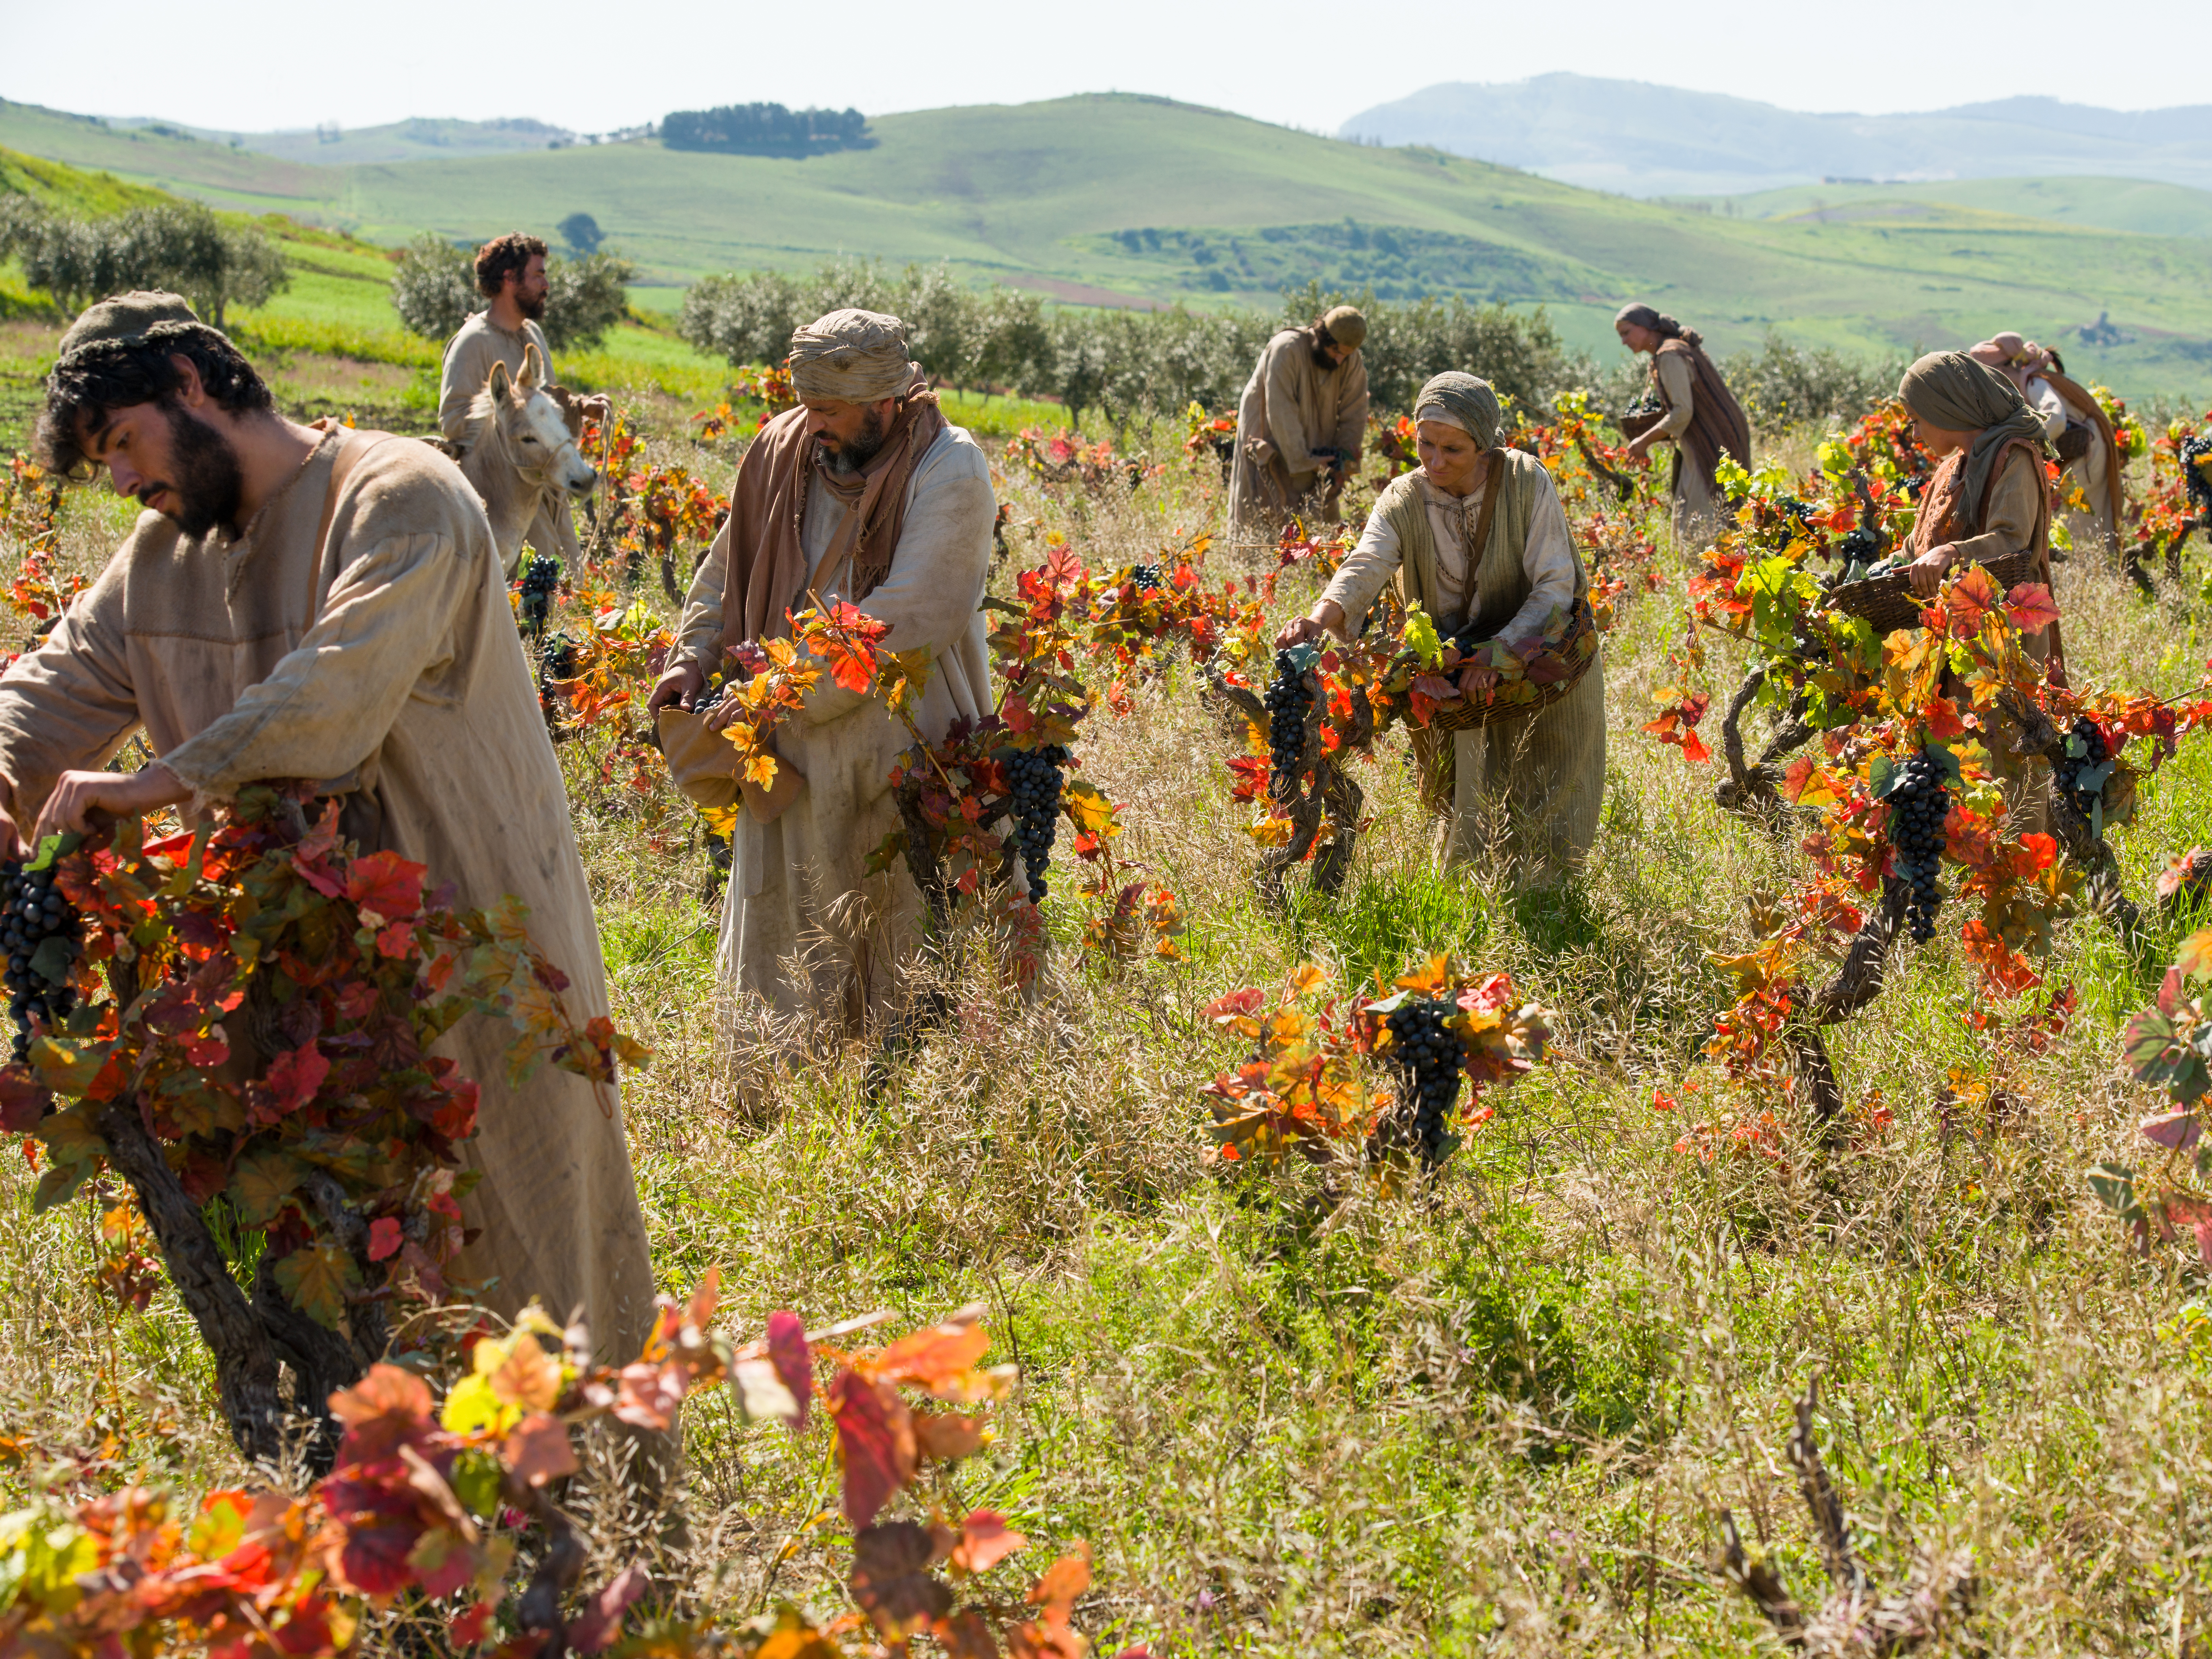 Men and women working in a vineyard in the countryside. 